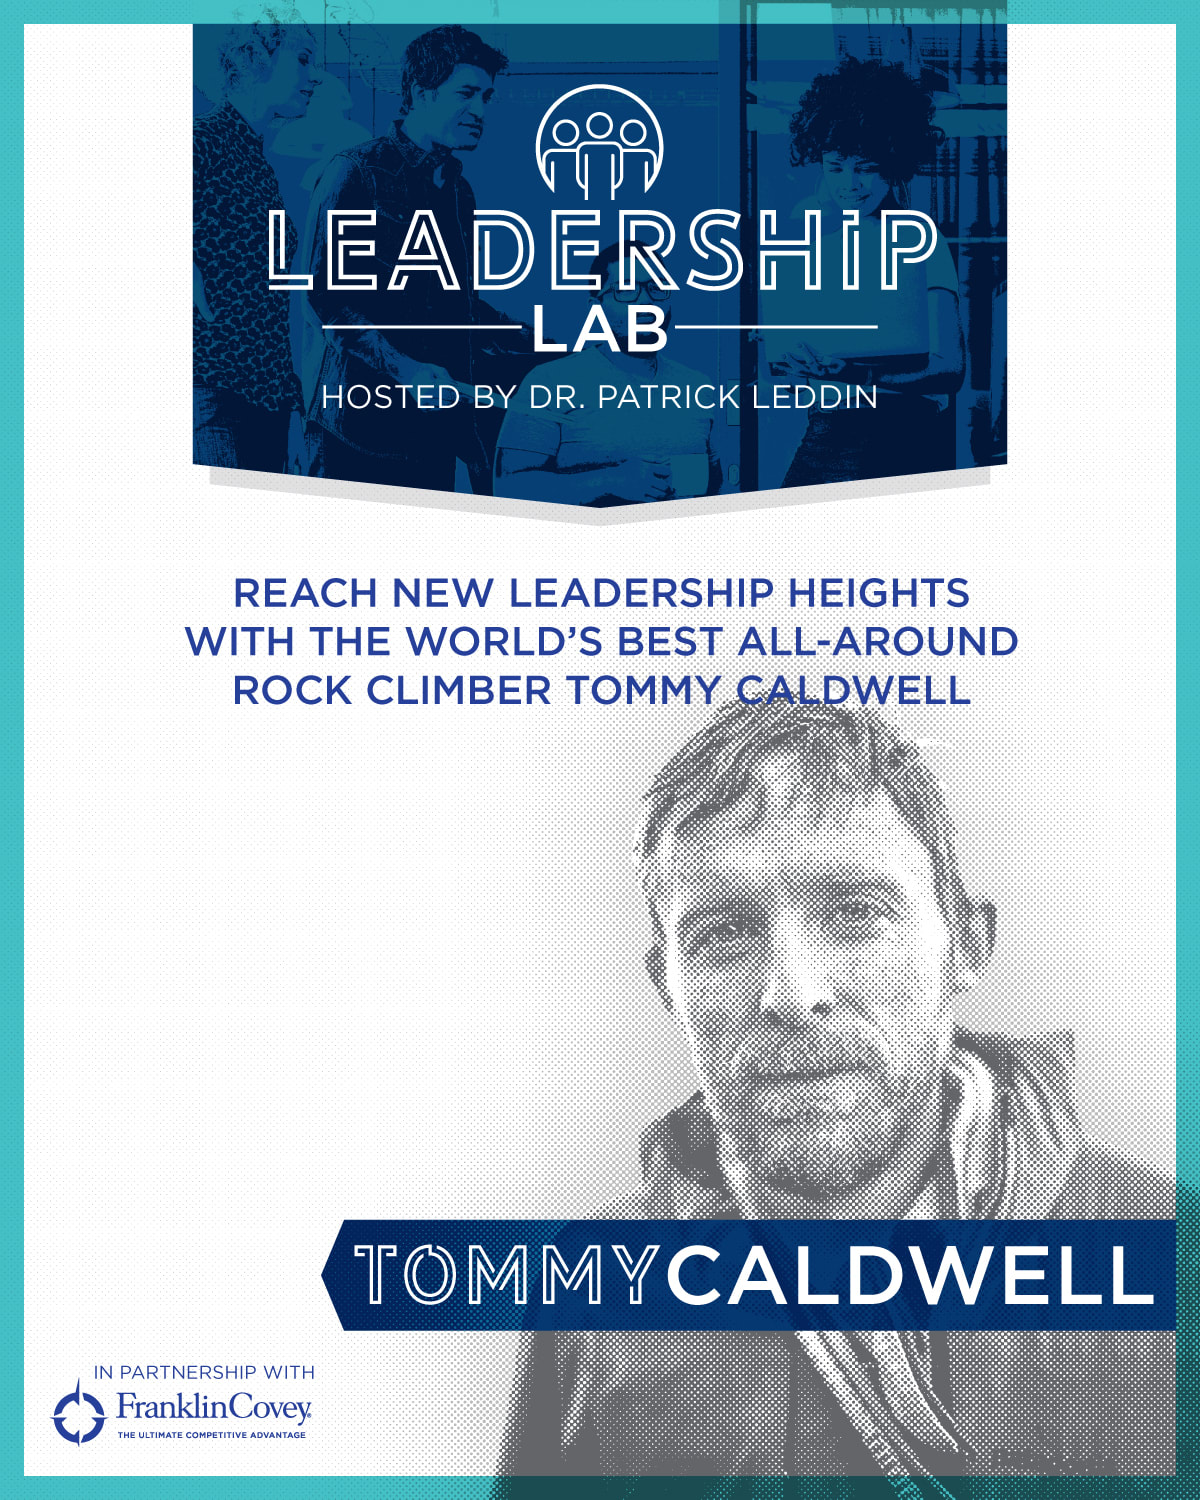 I managed to get Tommy Caldwell on my leadership podcast - worth the listen for sure www.leddingroup.com/podcast or wherever you find your podcasts. Just look for the Leadership Lab